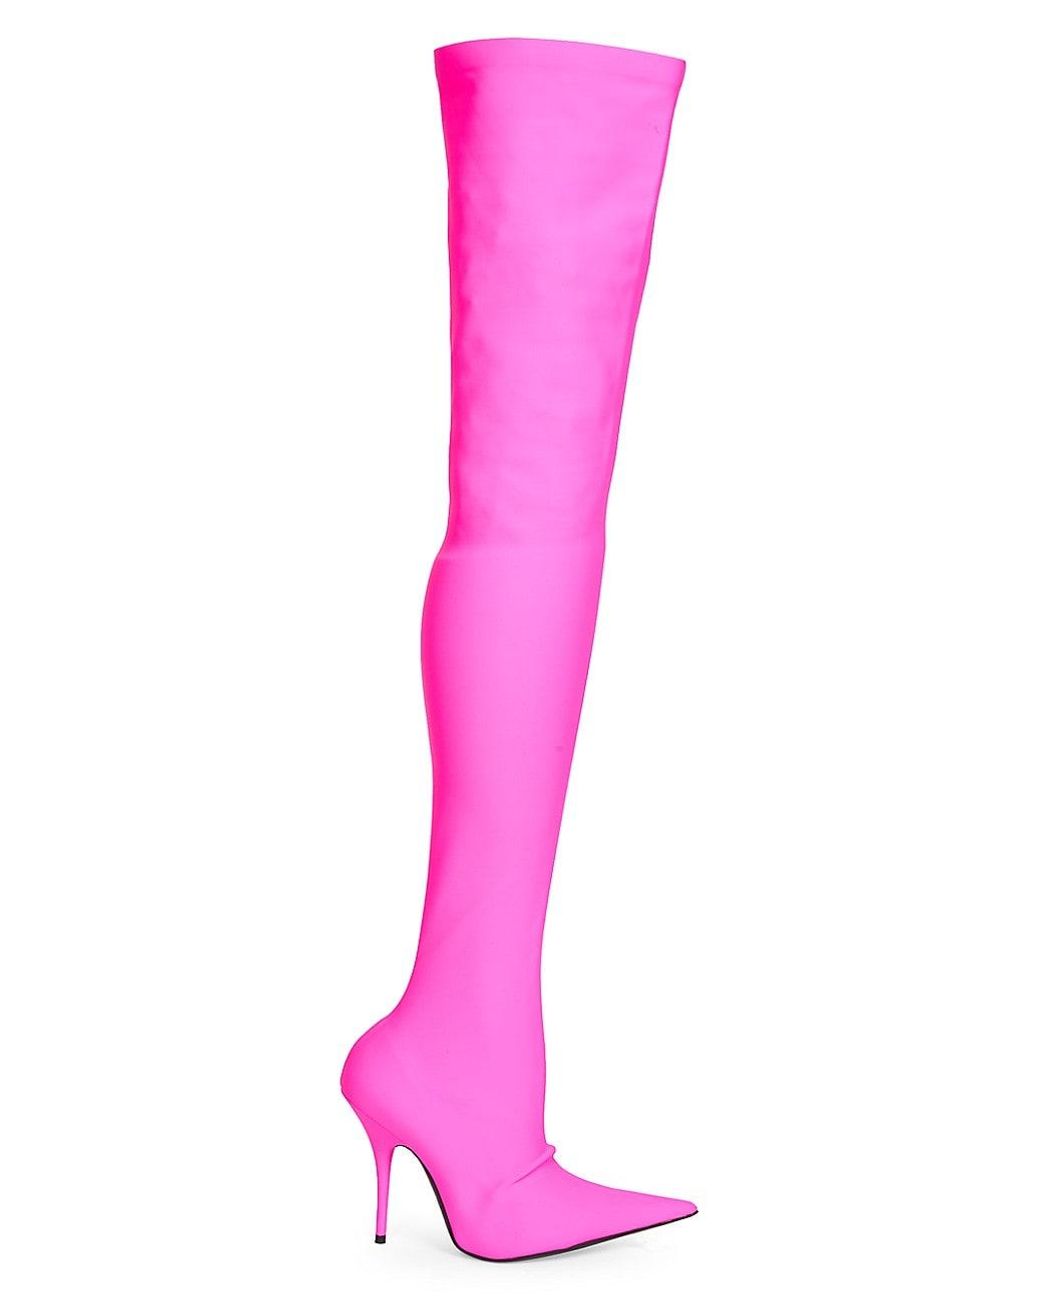 Balenciaga Synthetic Cuissard Knife 110 Over-the-knee Boots in Pink | Lyst